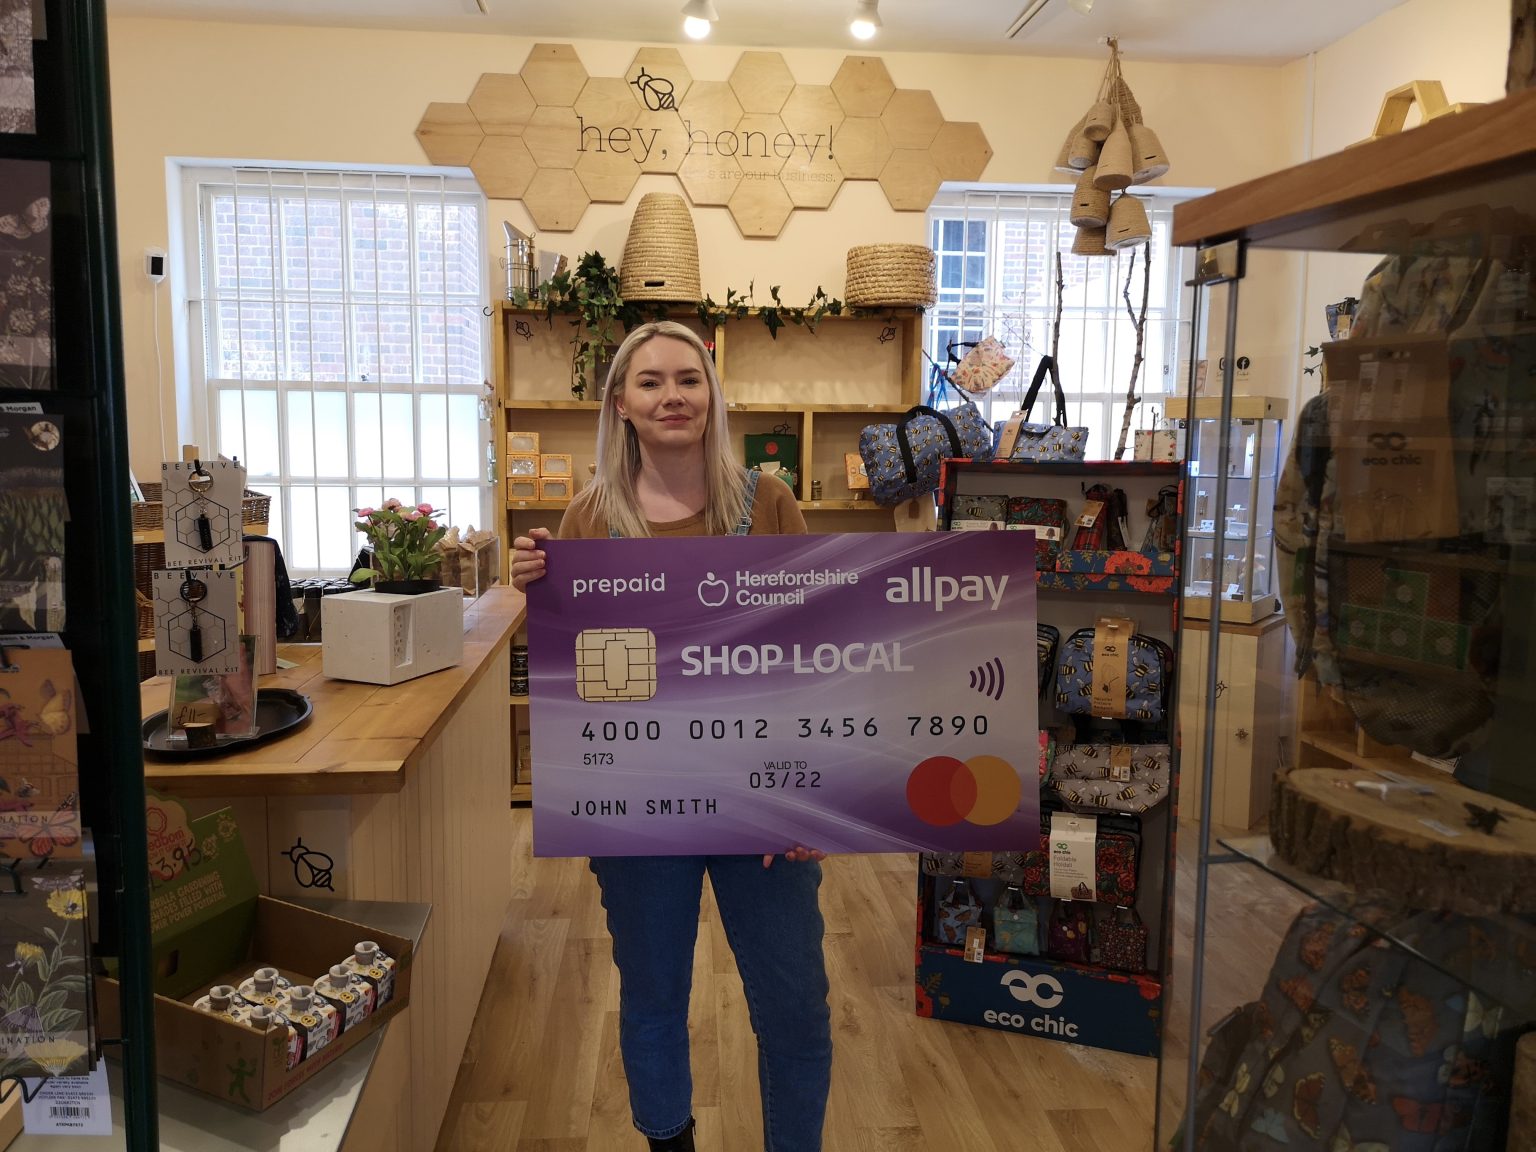 NEWS | Just hours left to apply for a new Shop Local card if you’ve lost or misplaced yours